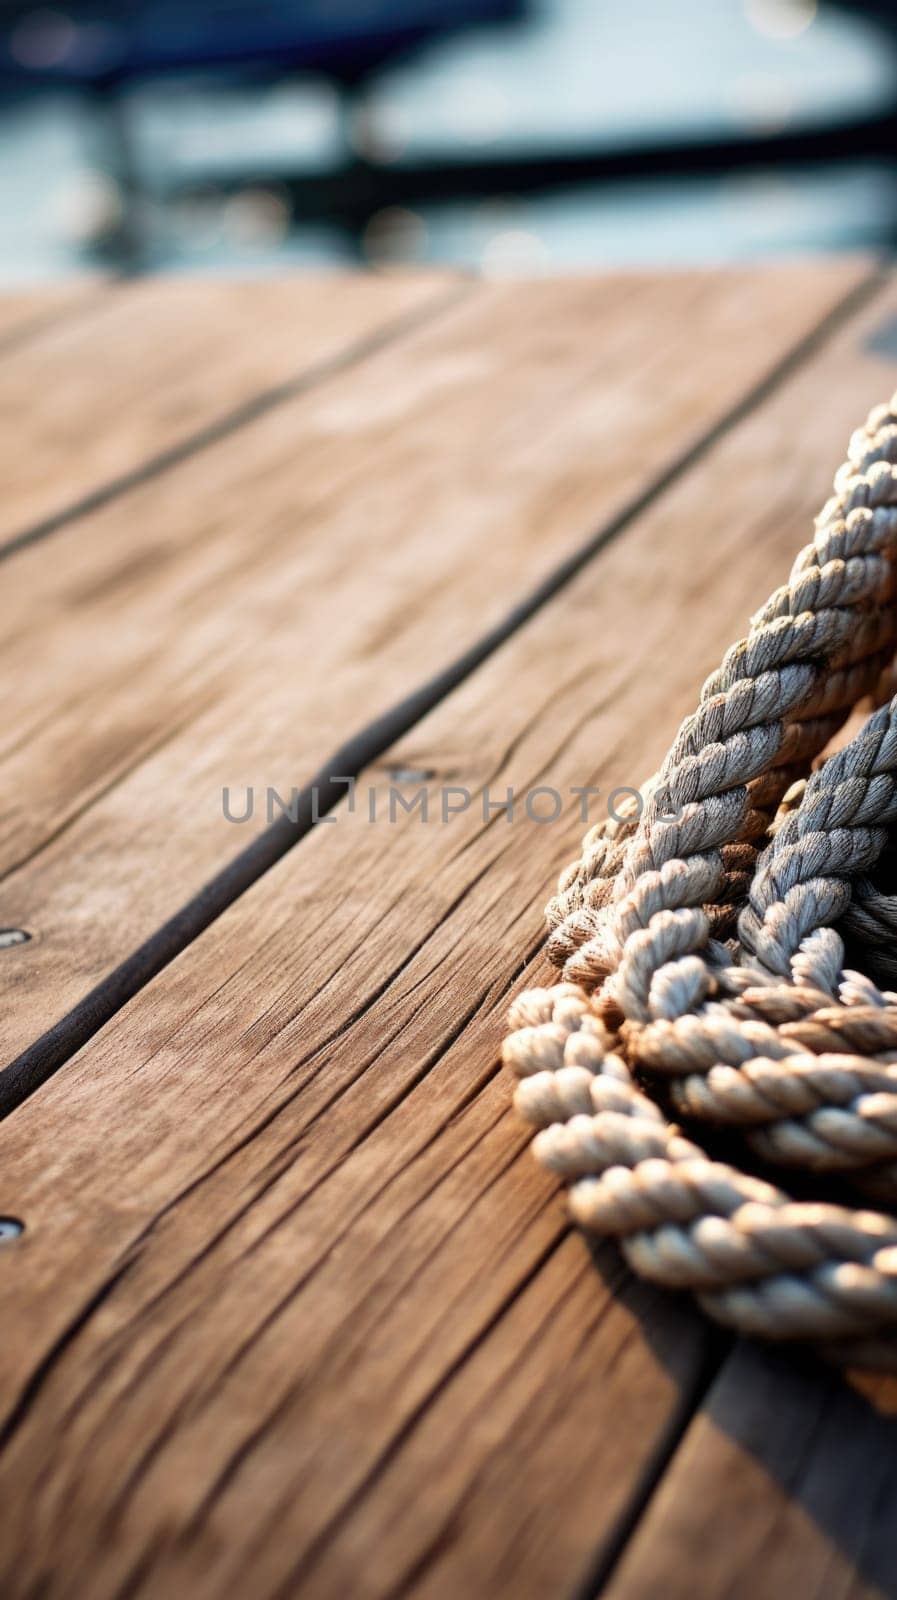 Rope on wooden deck with boats in background